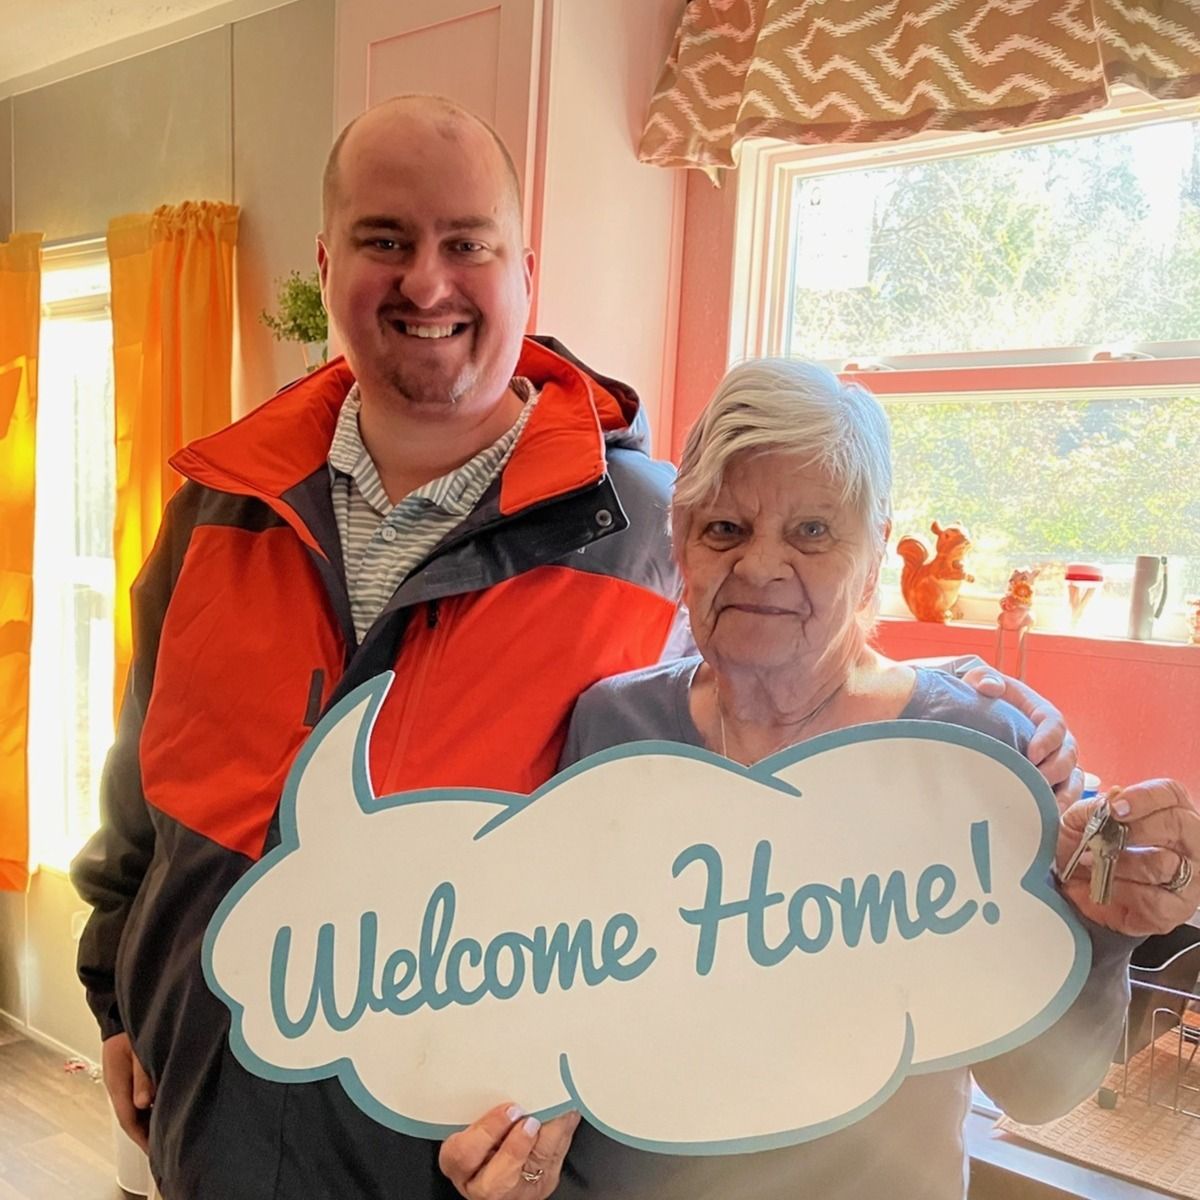 DIANE M. welcome home image